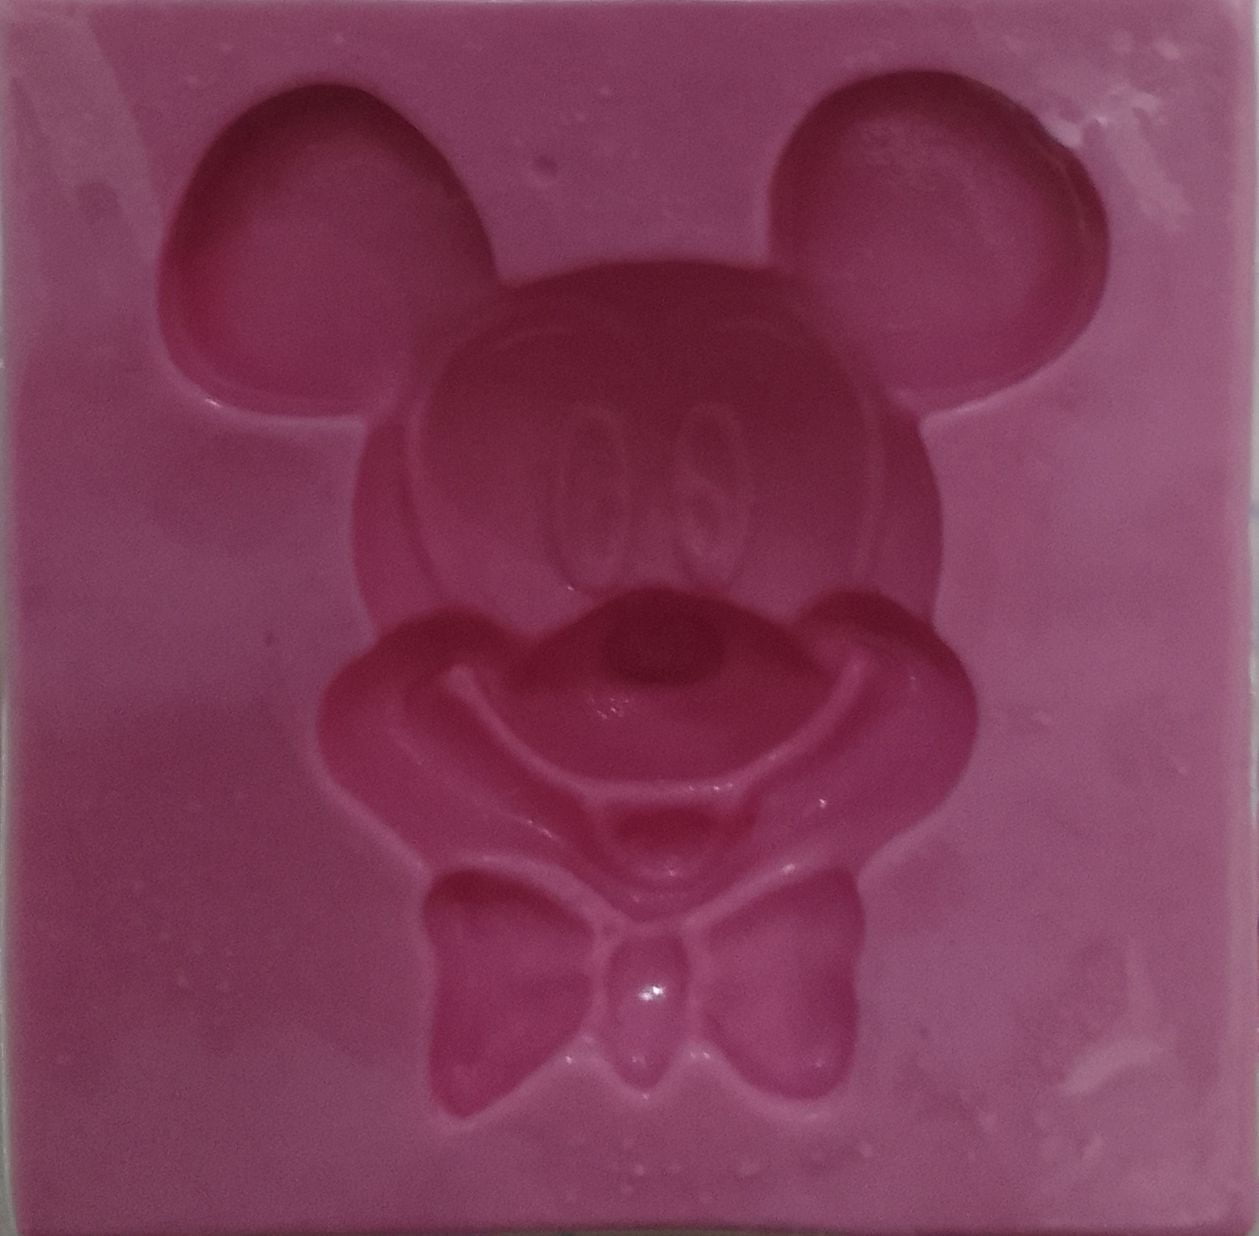 MOLDE DE SILICONE P/ BISCUIT - MICKEY